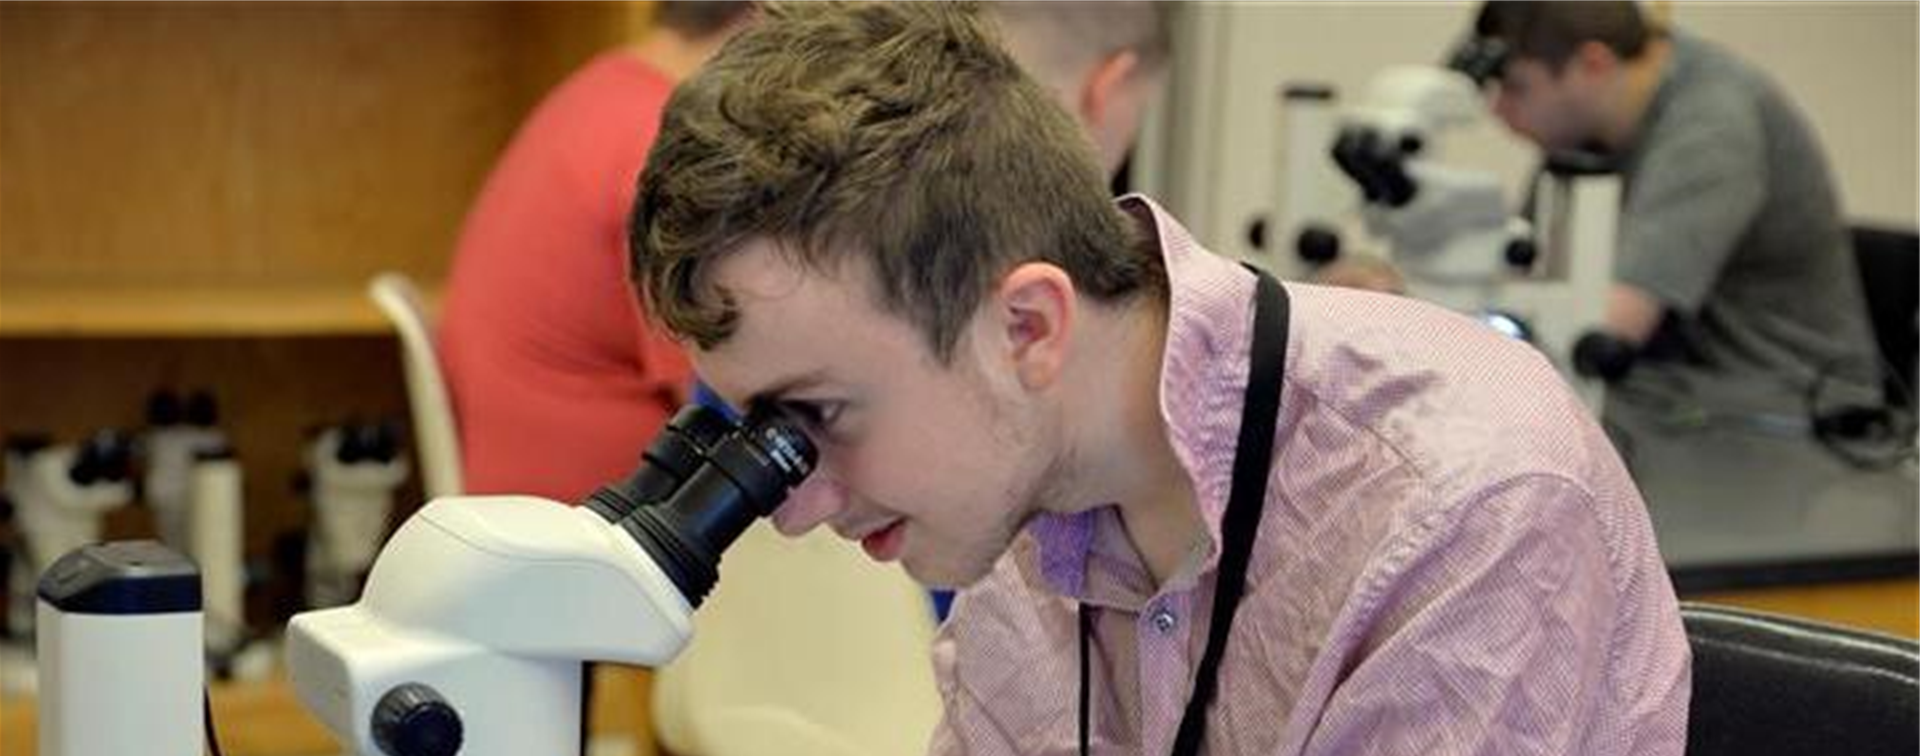 Photo of a teenage boy looking into a microscope in a lab classroom. A few more students are in the background at another table.